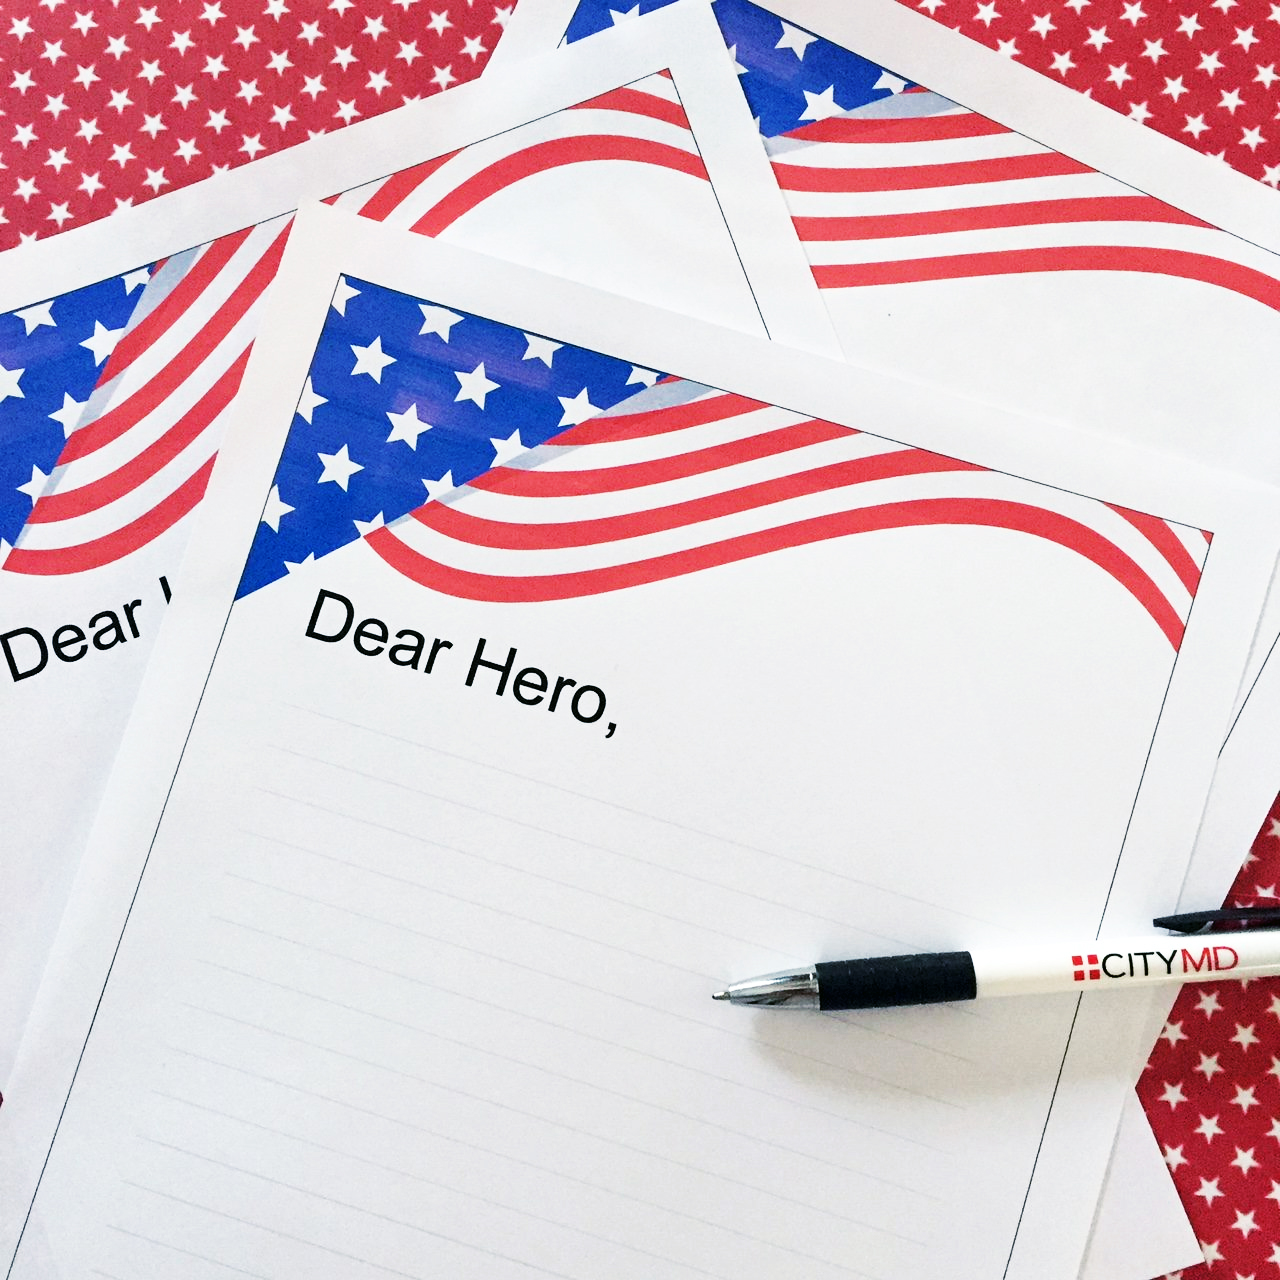 Writing and Sending Letters to the military